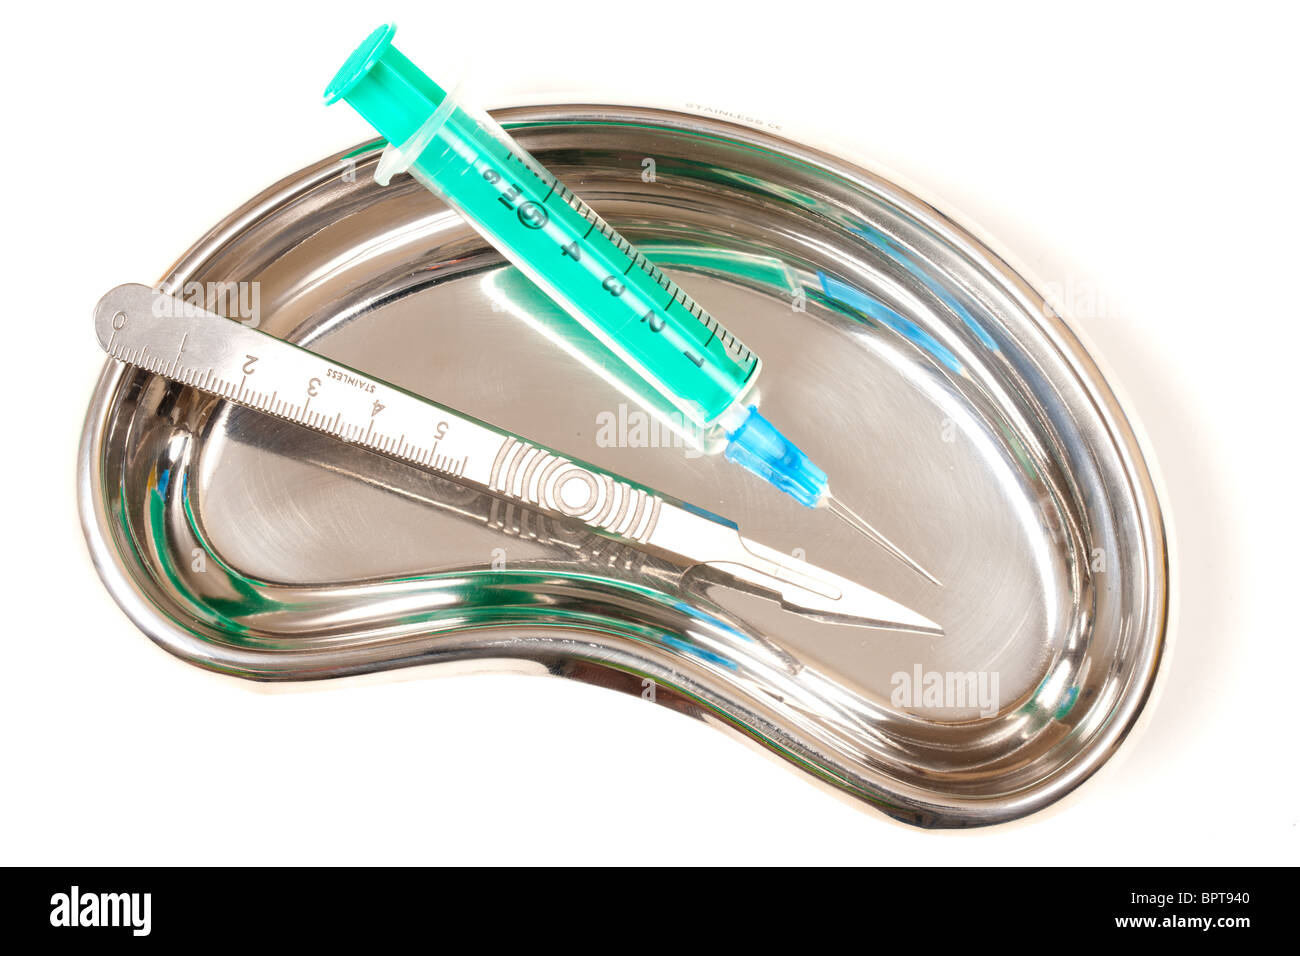 Green Syringes and scalpel in a stainless steel kidney dish Stock Photo